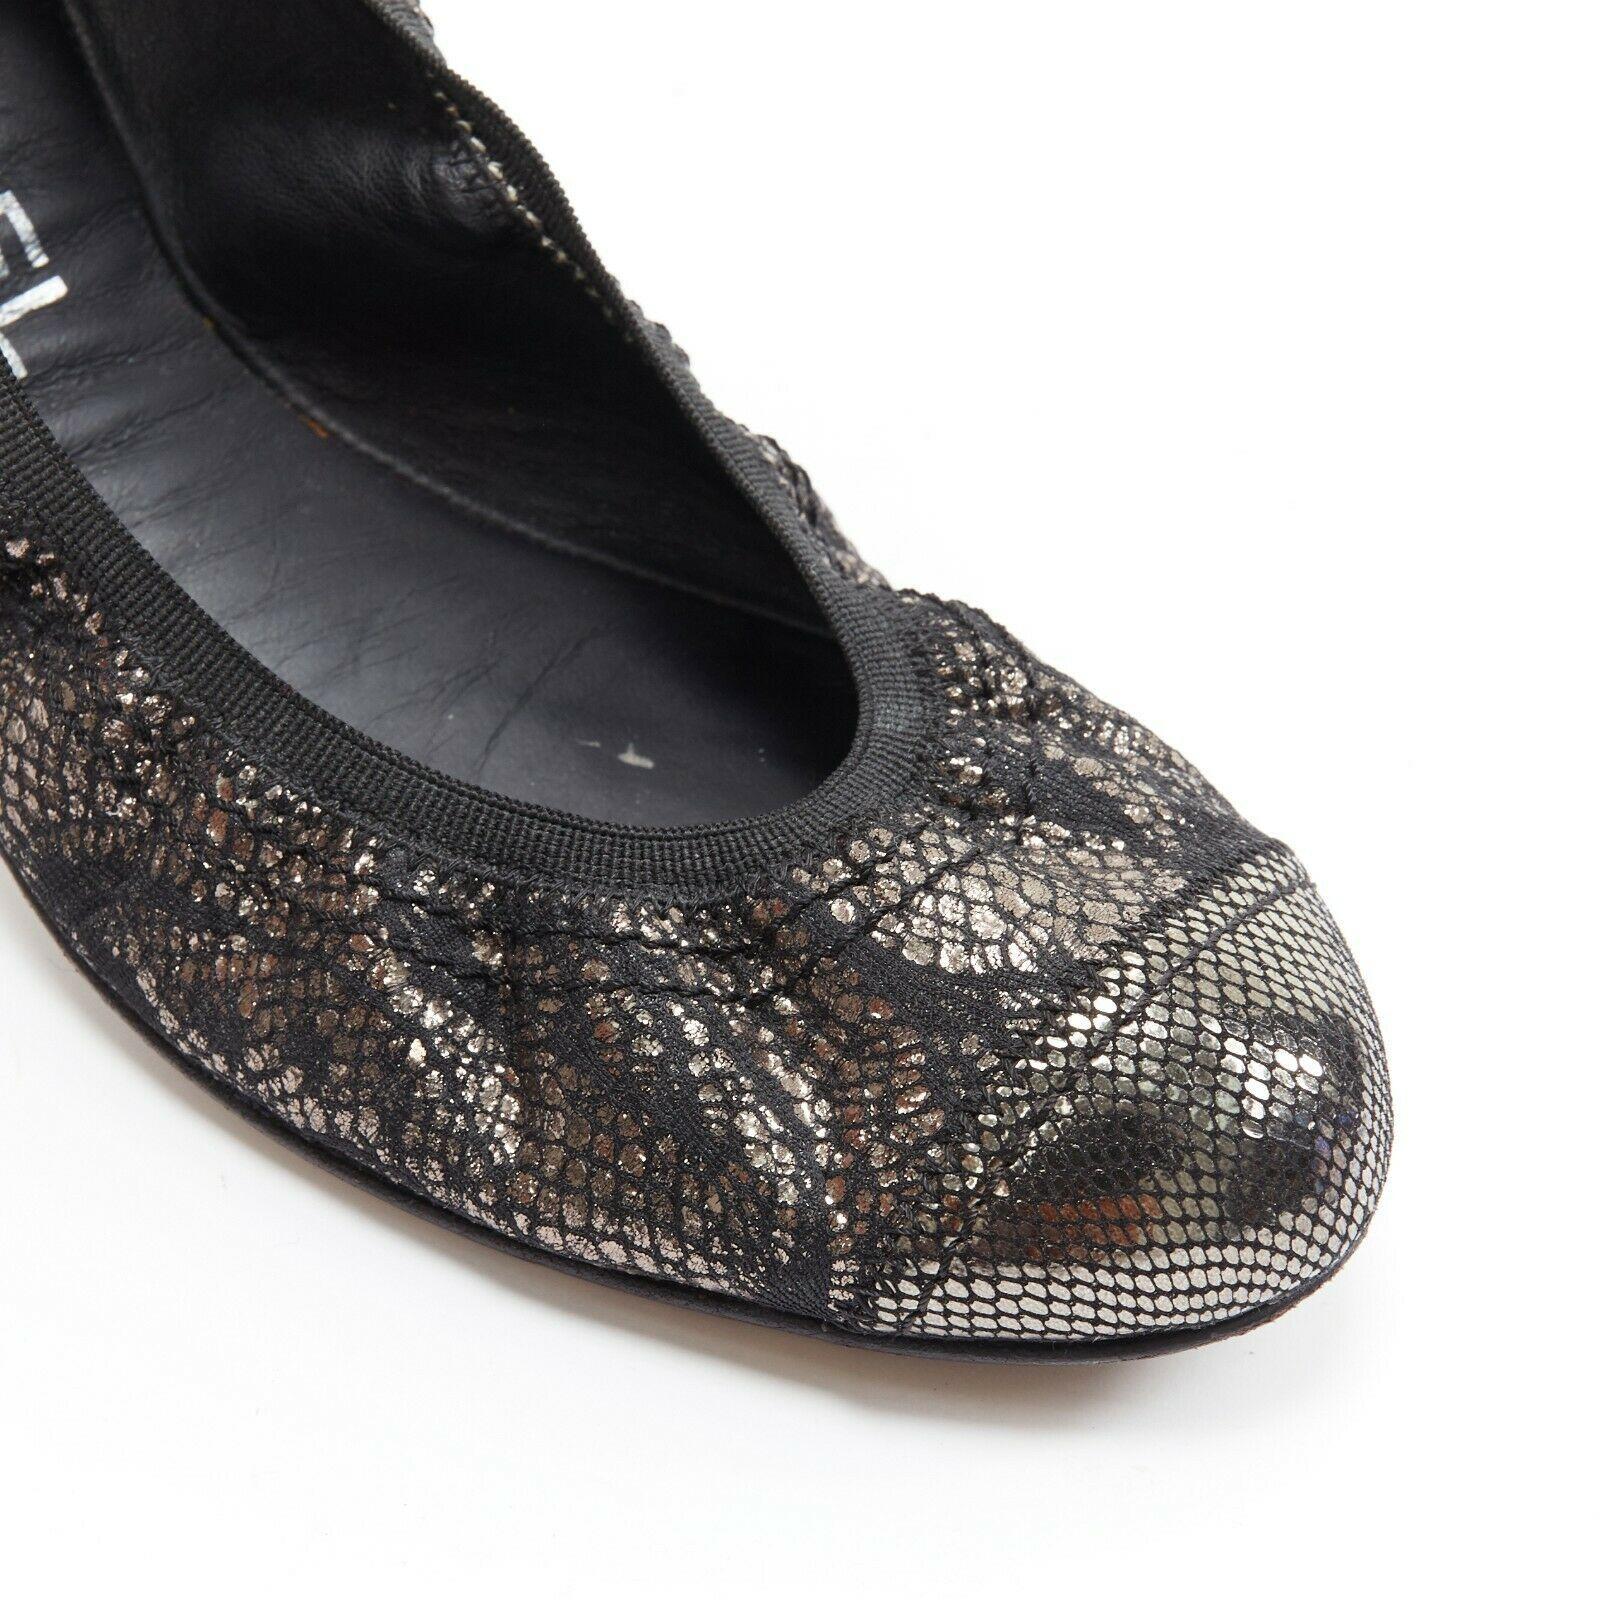 CHANEL metallic copper black print stretch fit flat ballerina flats EU36.5C
Designer: Chanel
Material: Copper, fabric
Extra Details: Metallic copper printed fabric upper. Rounded toe. Stretch fit ballerina. Quilted rubber sole. 
Made in